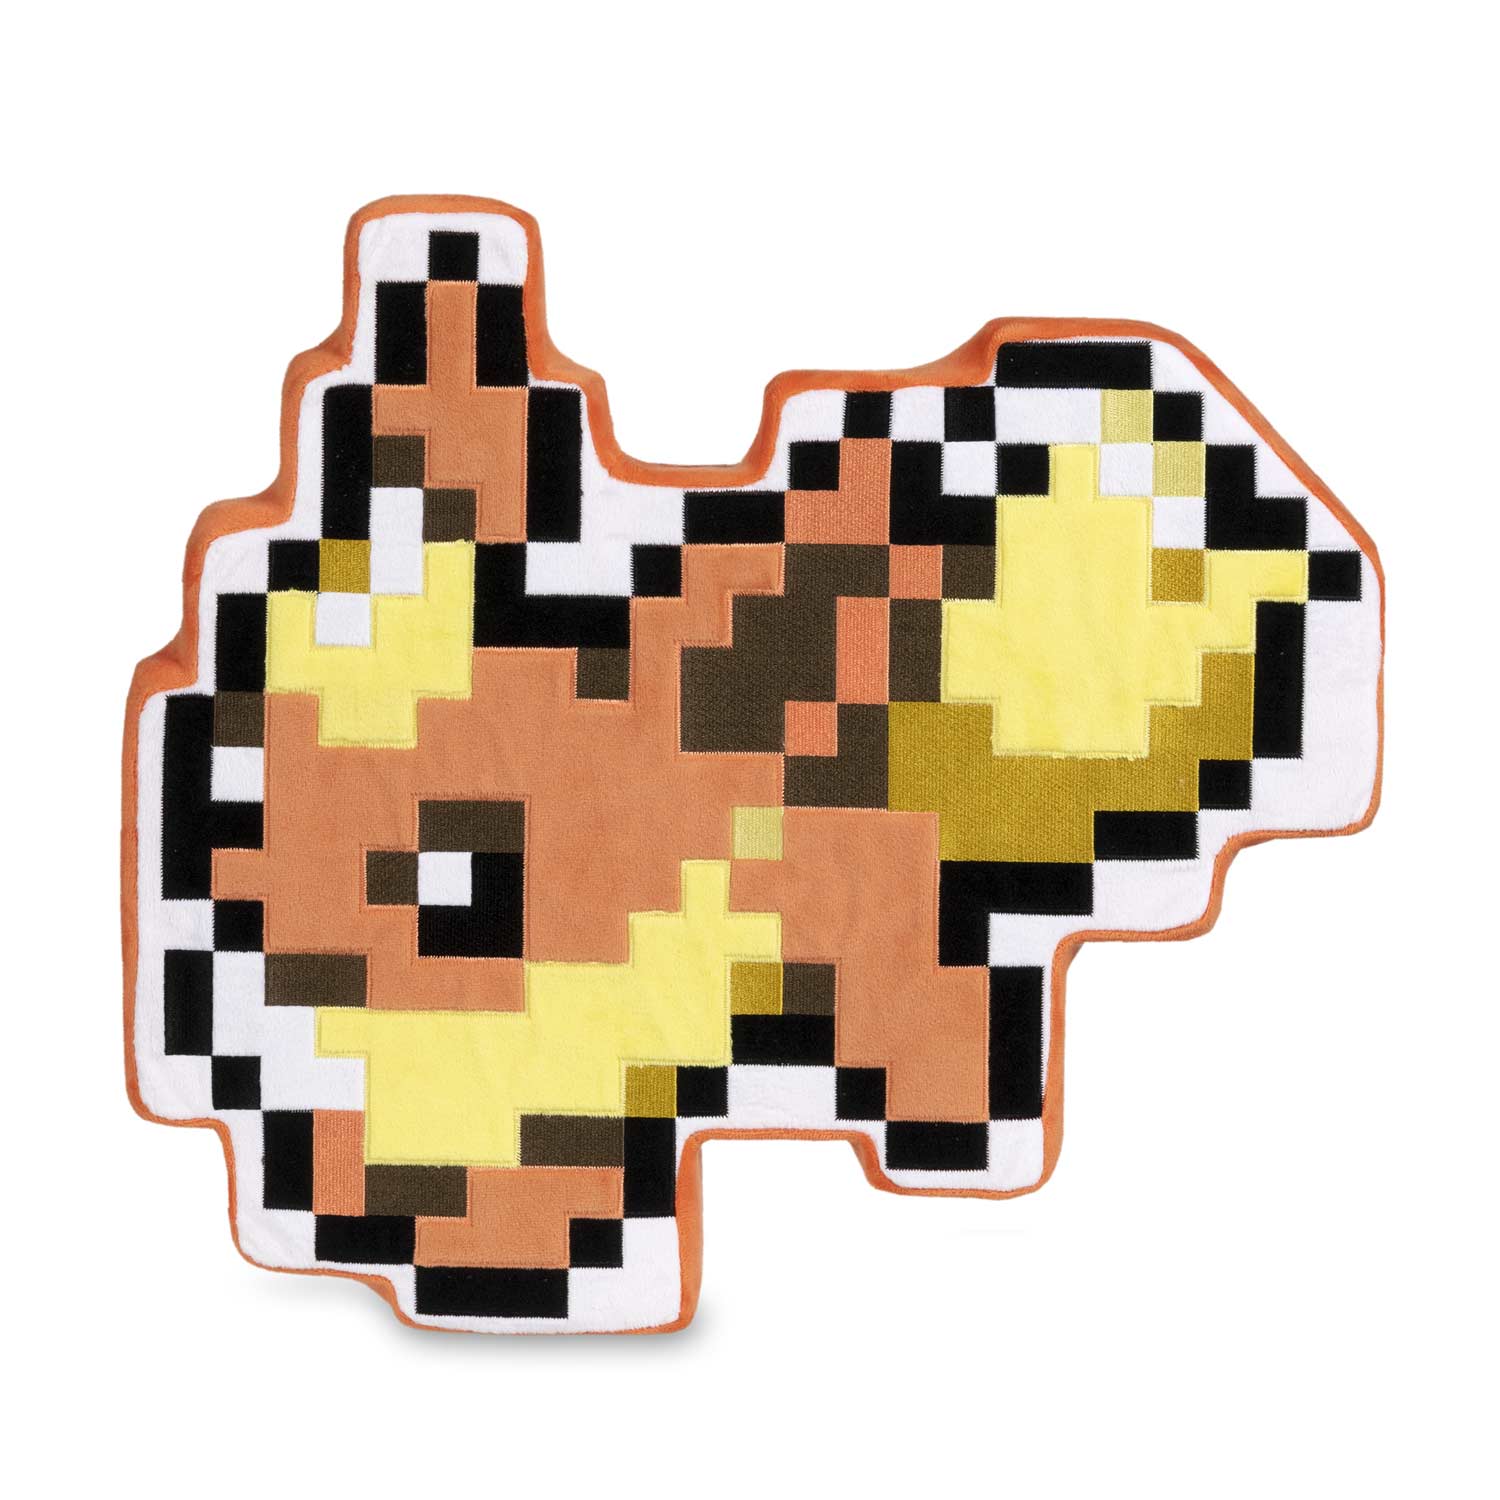 New Eevee Pixel collection lands in the Pokémon Center ...